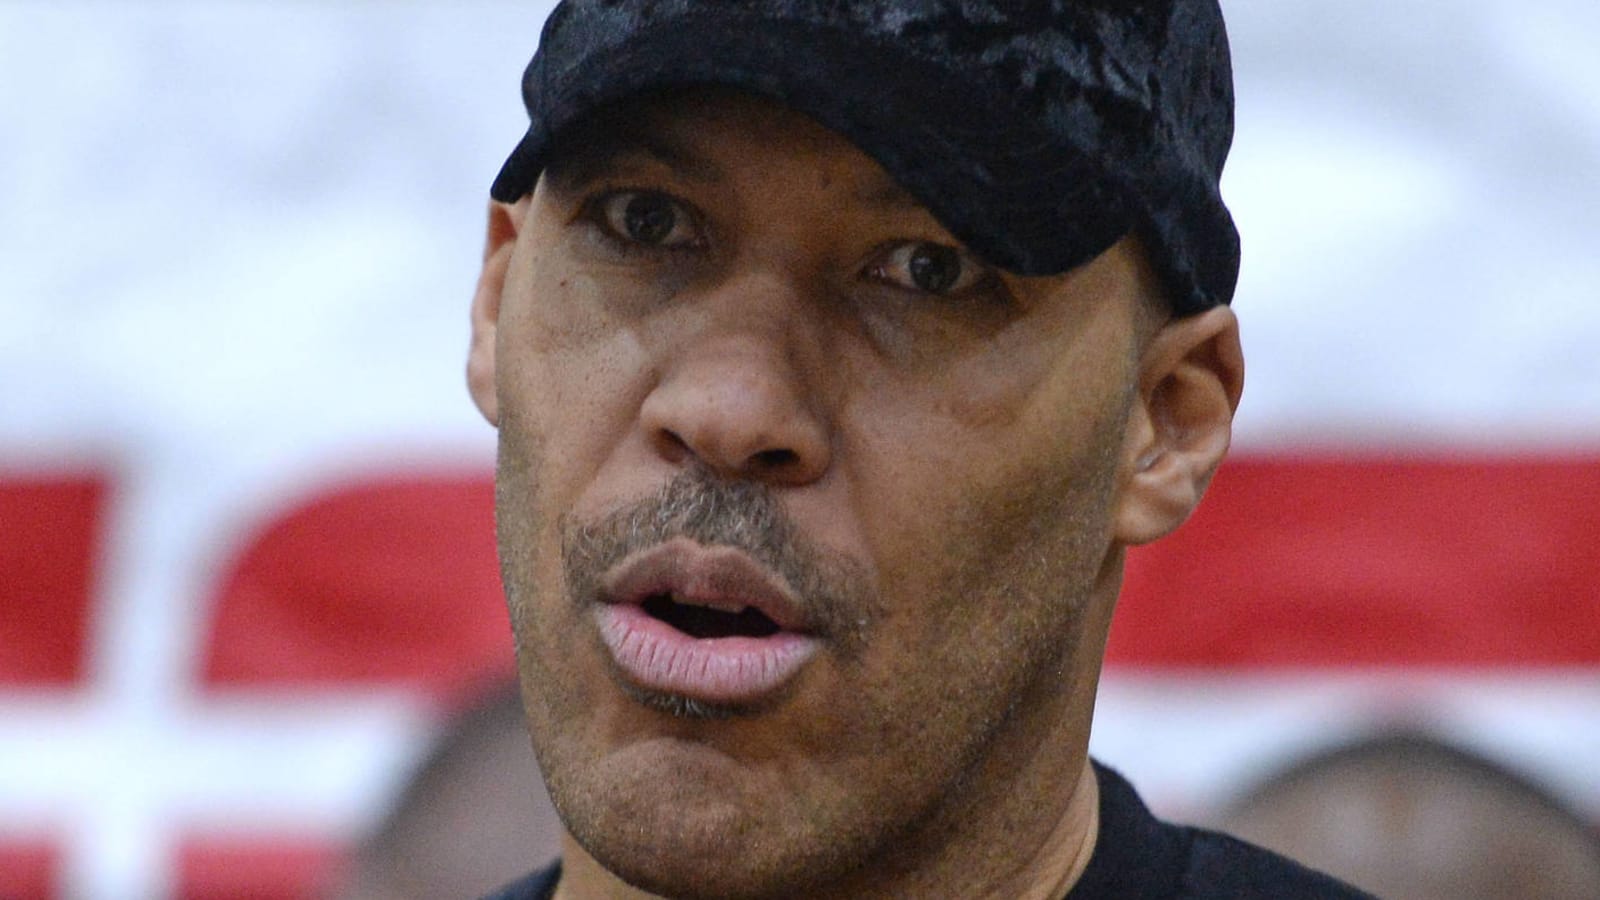 LaVar Ball delivered harsh advice to his sons about finding girlfriends in the NBA